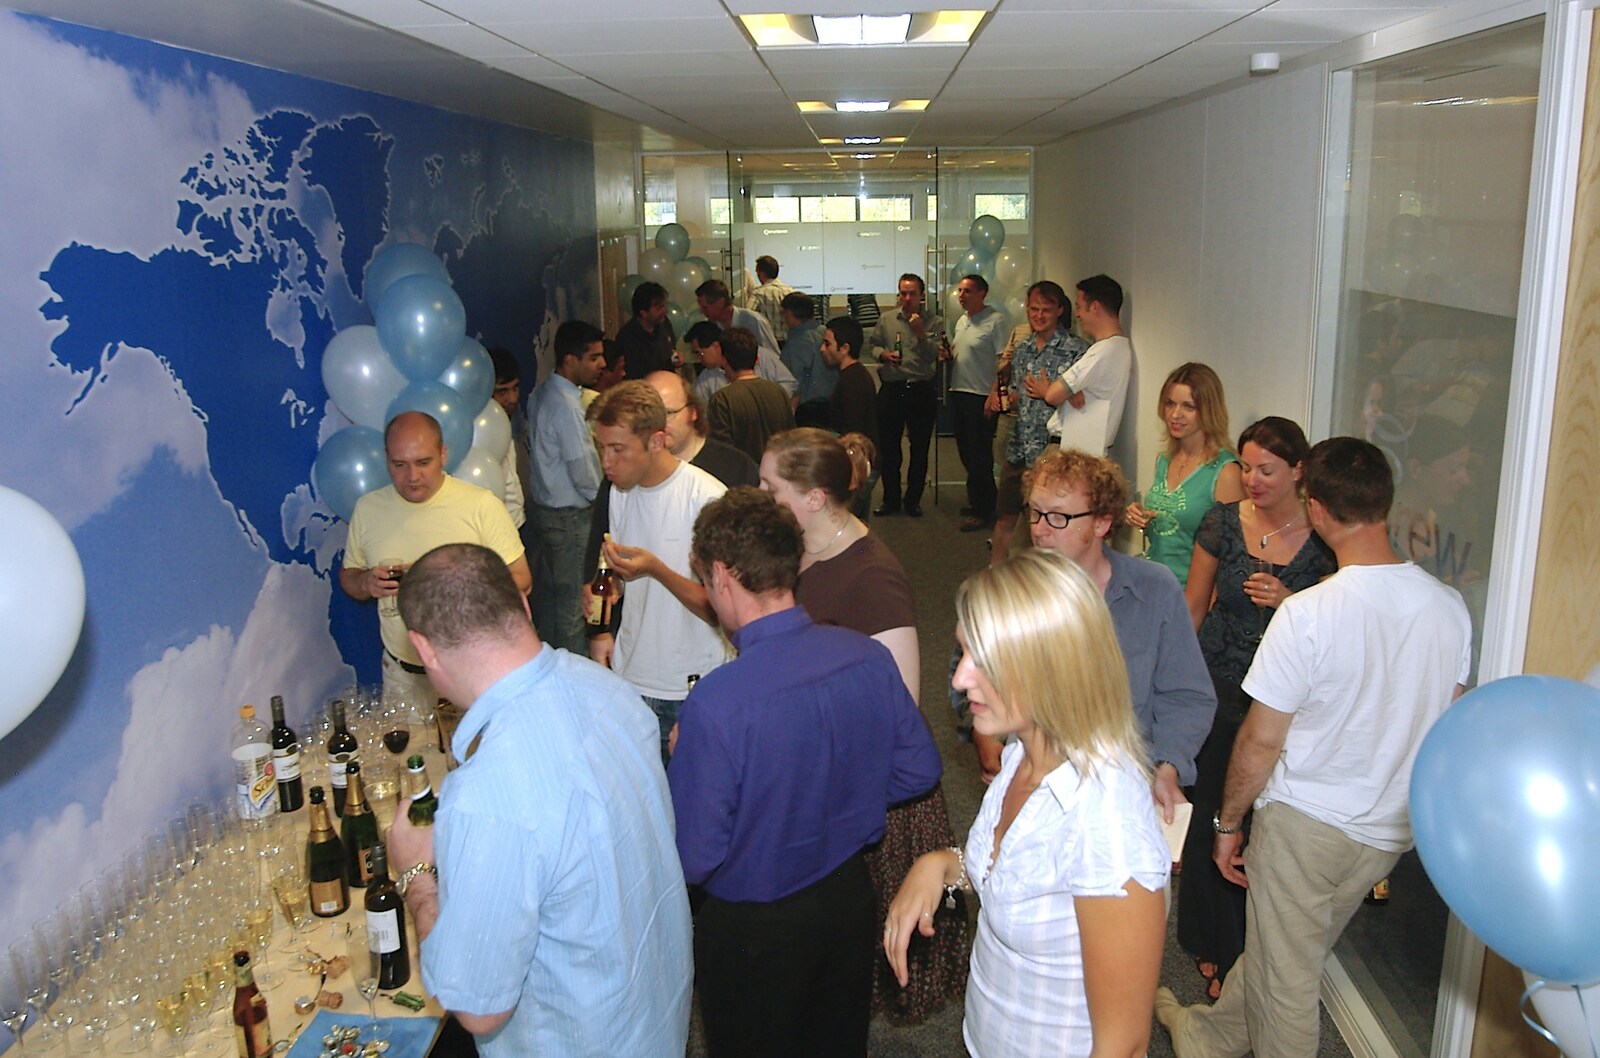 The party is in effect from Qualcomm's New Office Party, Science Park, Milton Road, Cambridge - 3rd July 2006